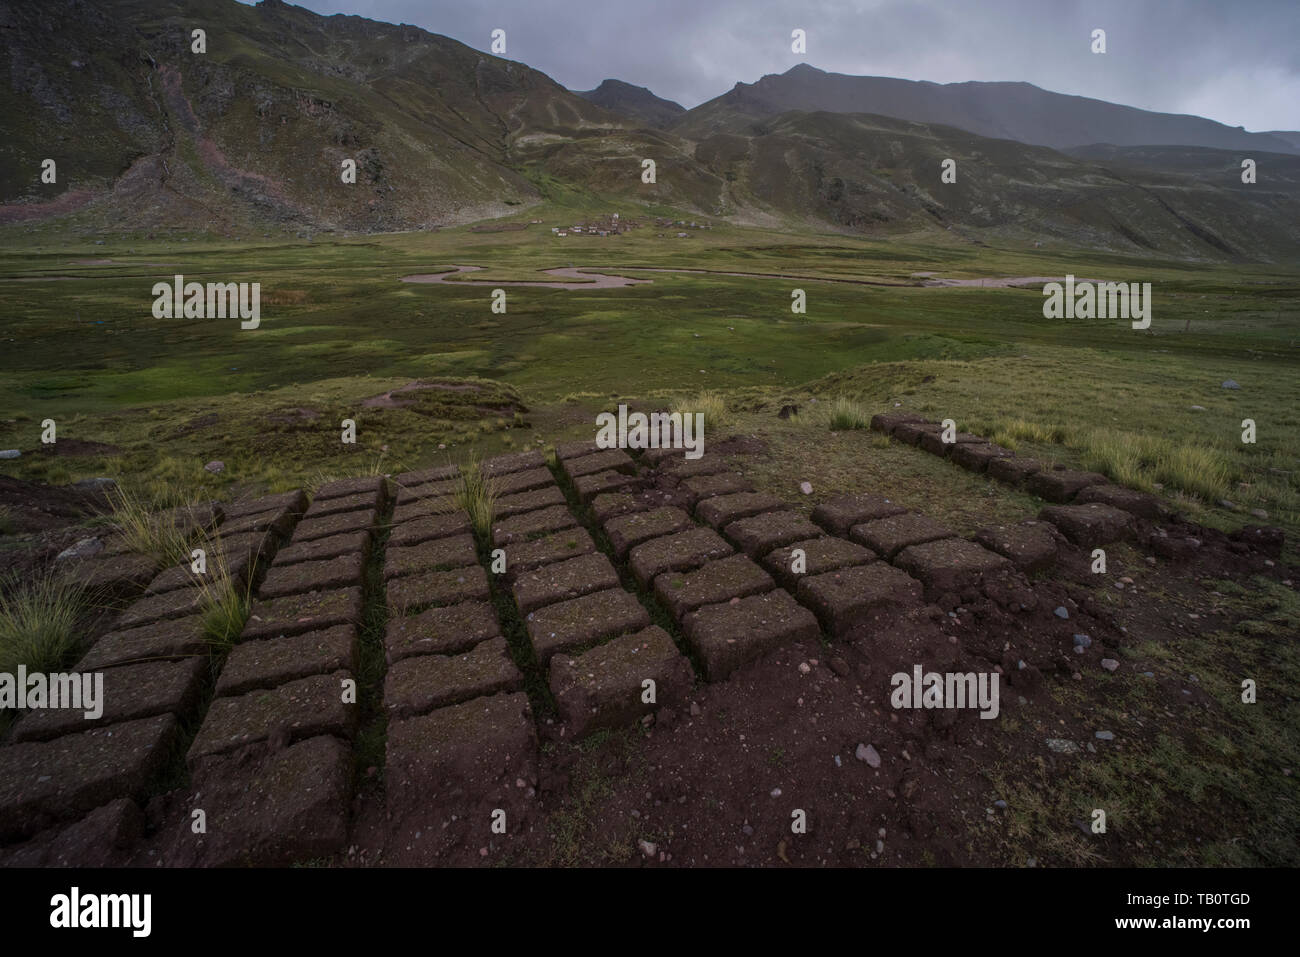 Mud bricks lay in the sun drying so that they can be used for construction in a nearby high Andean village in Peru. Stock Photo